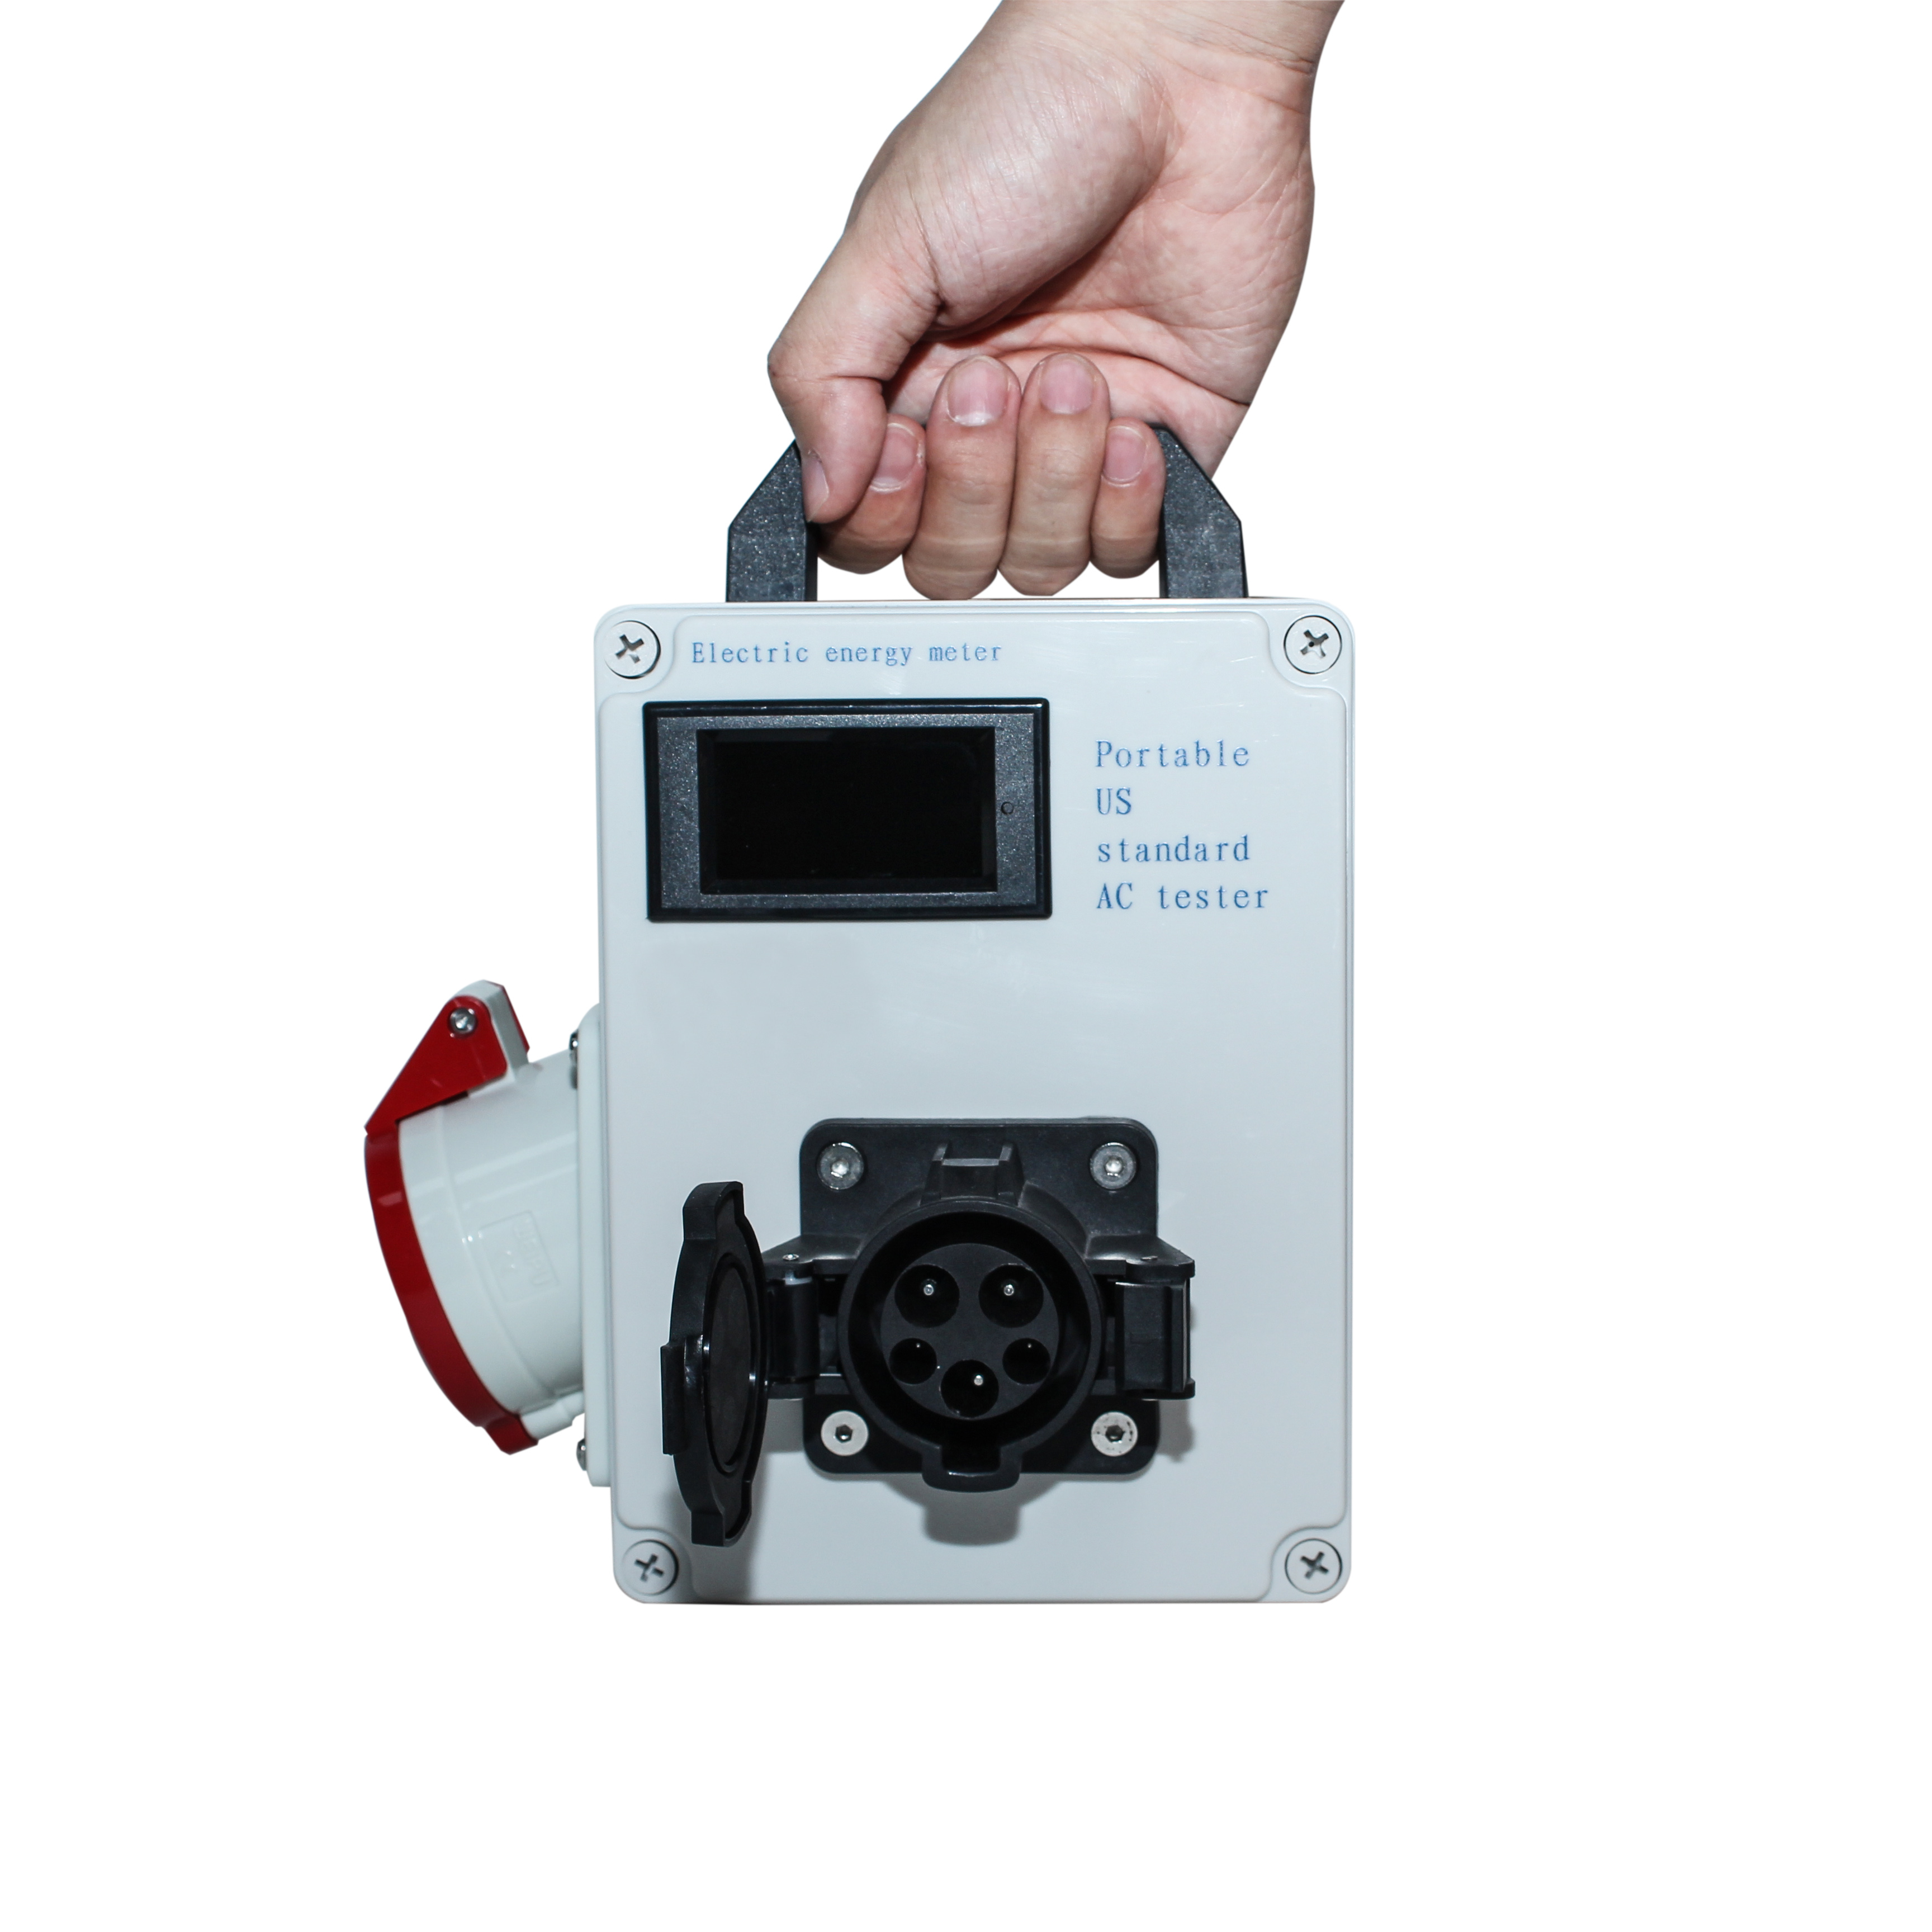 Portable ev charger tester equipment with type 1 socket Featured Image